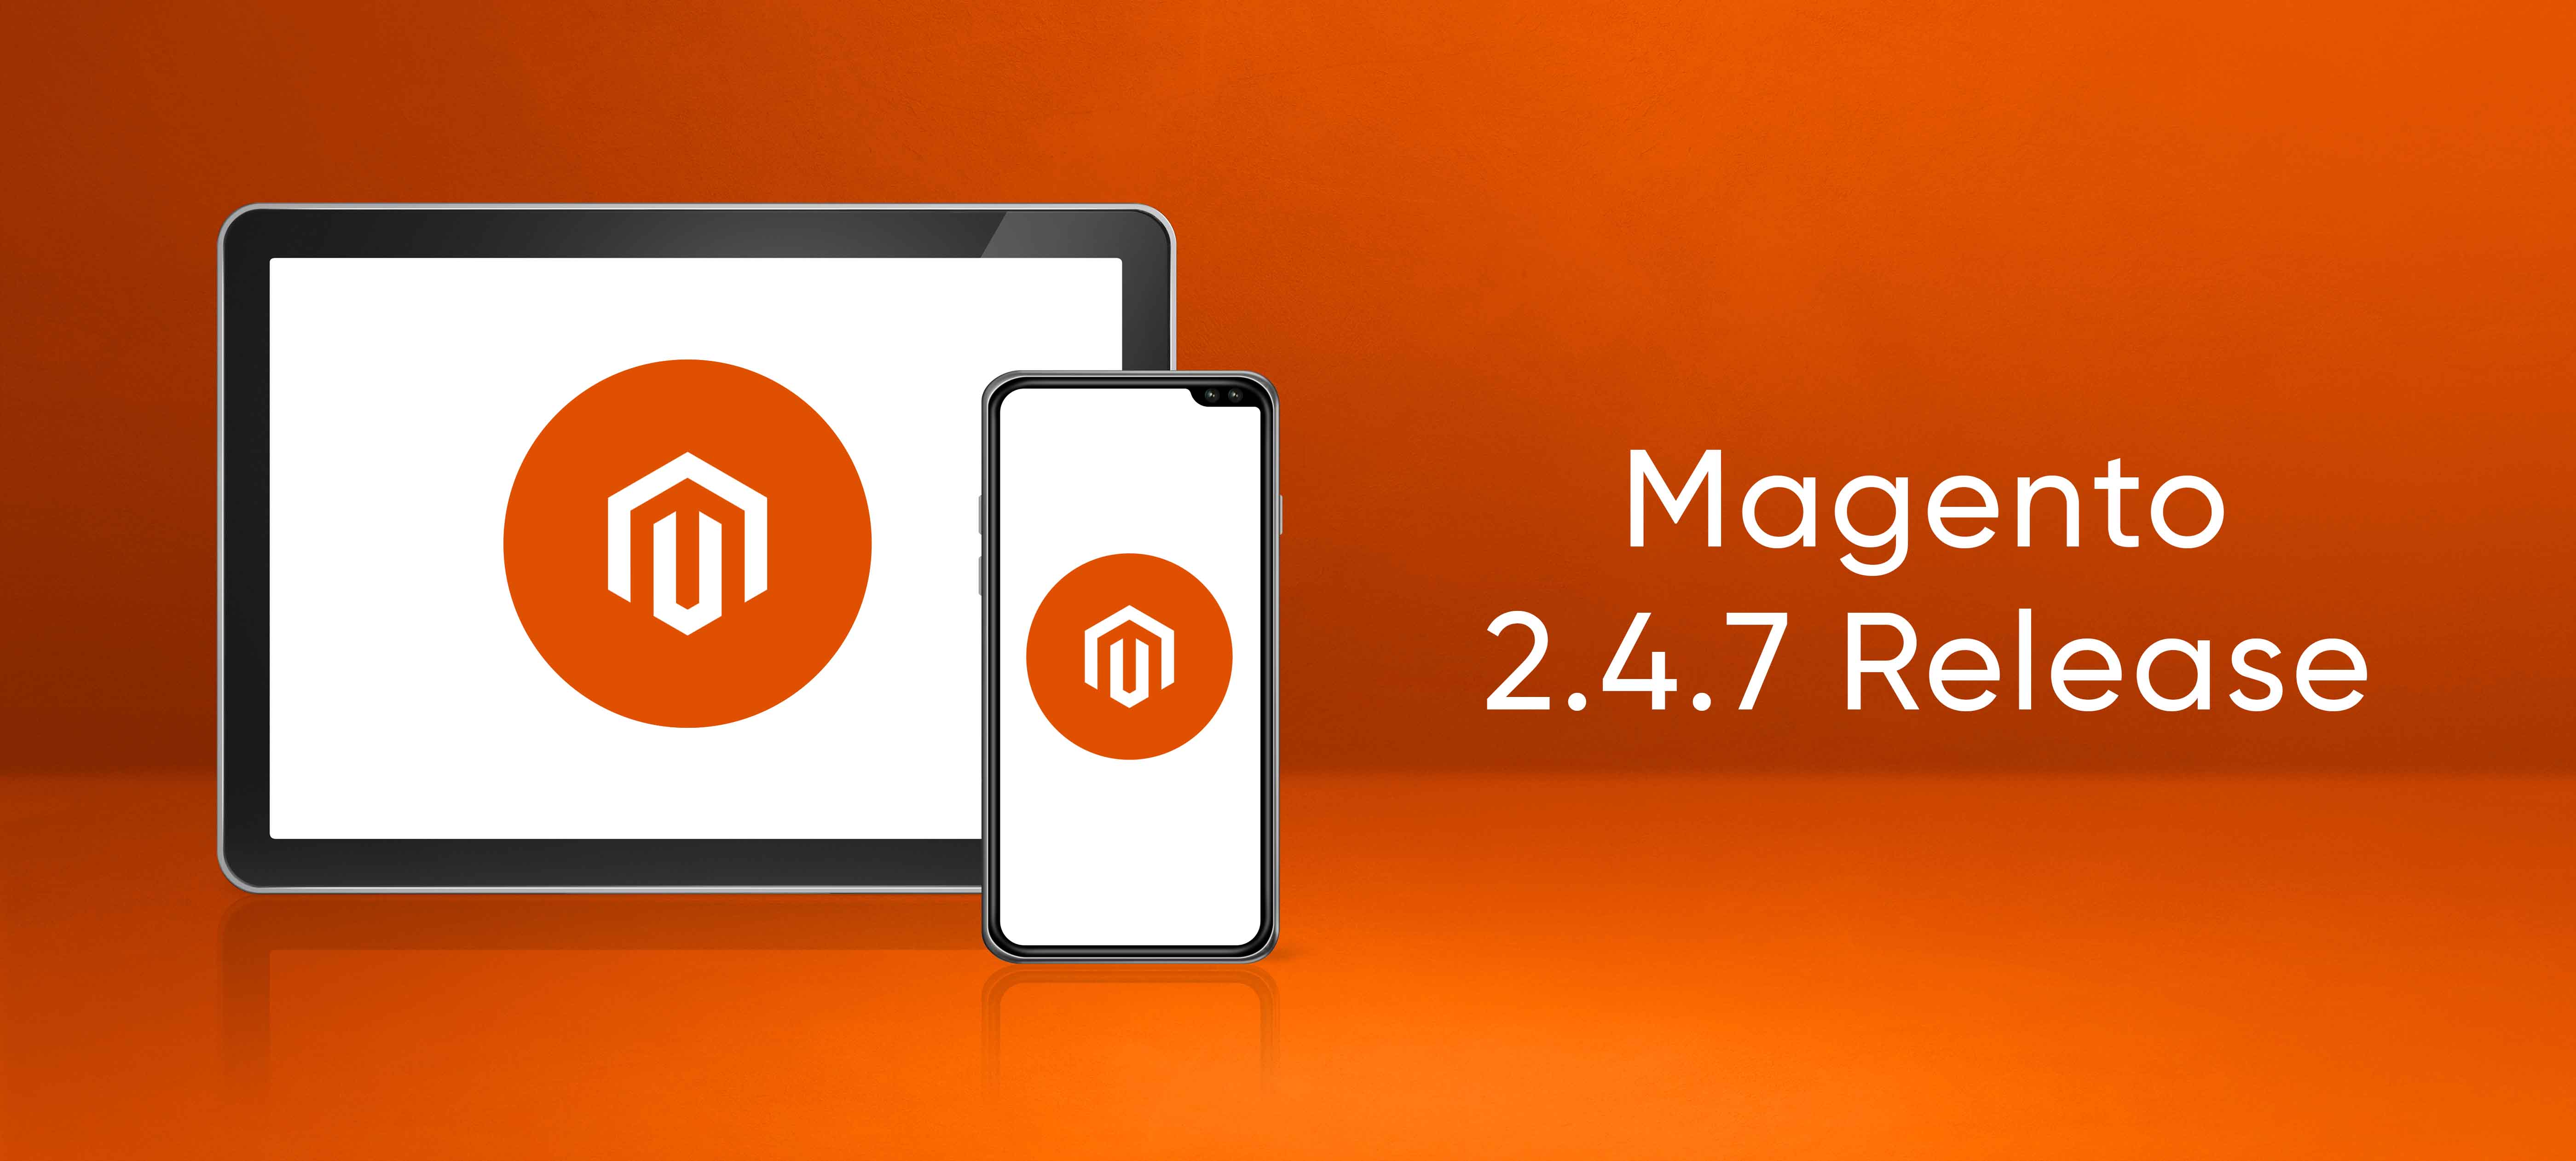 Magento 2.4.7 Release Available: Key Features and More!!